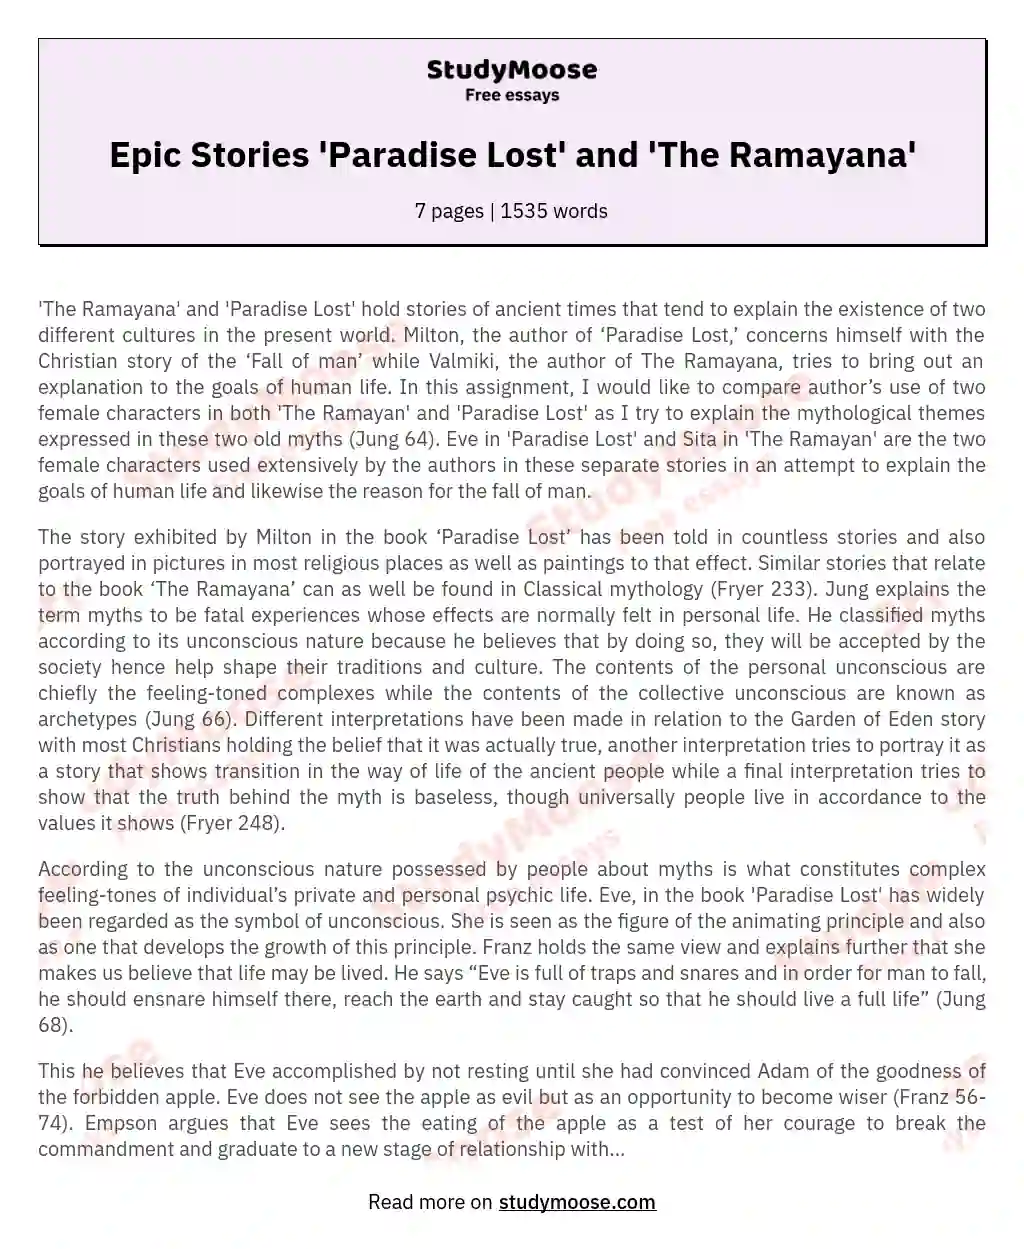 Epic Stories 'Paradise Lost' and 'The Ramayana'